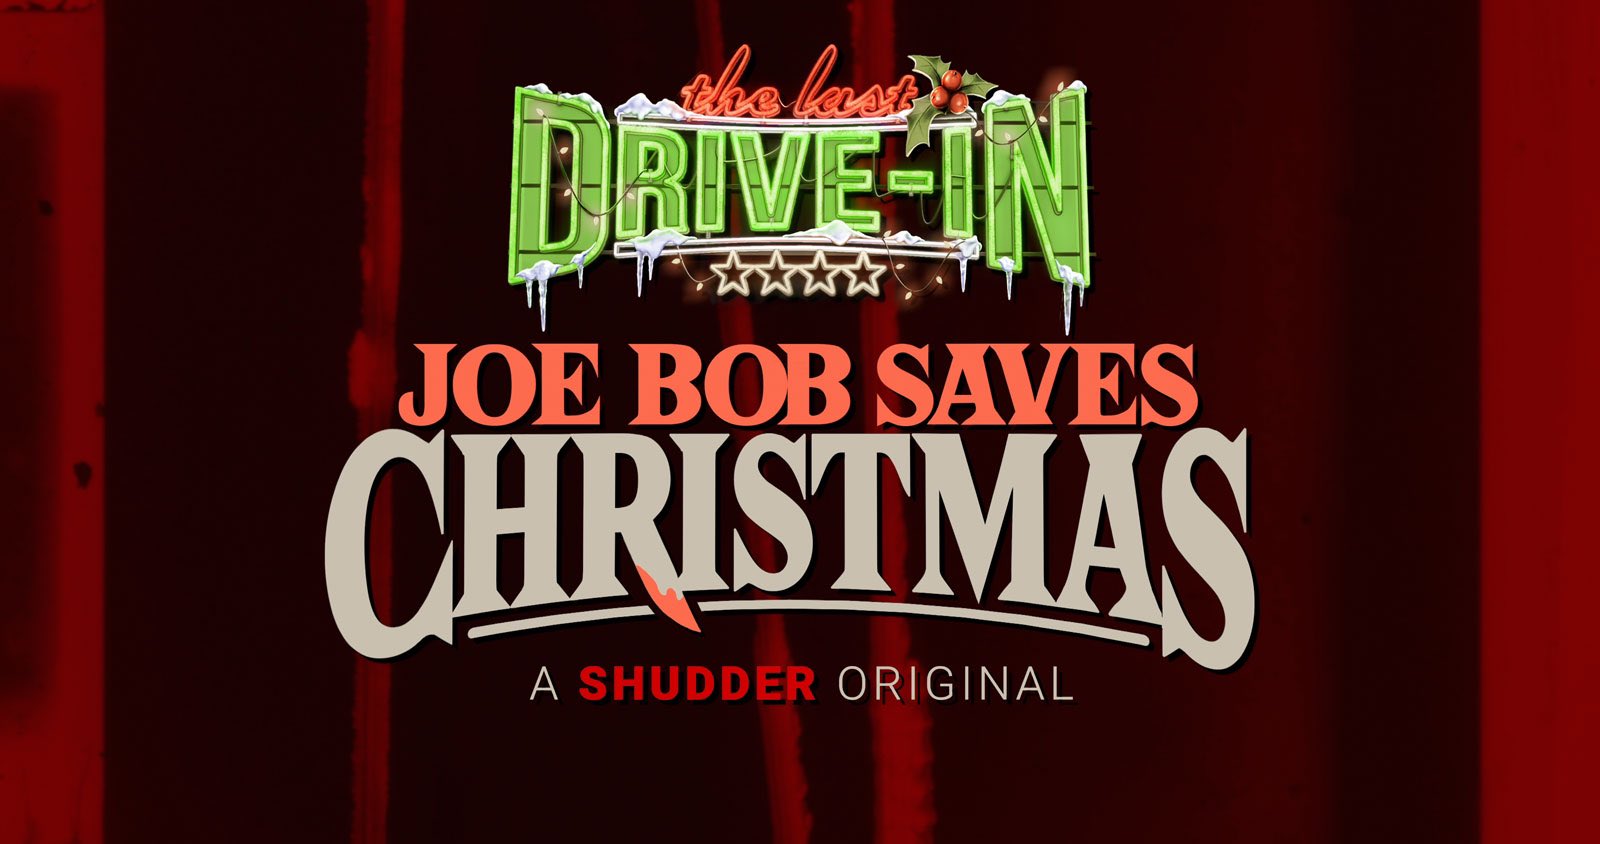 Joe Bob Saves Christmas to Feature Charity Auction, Premieres Friday 12